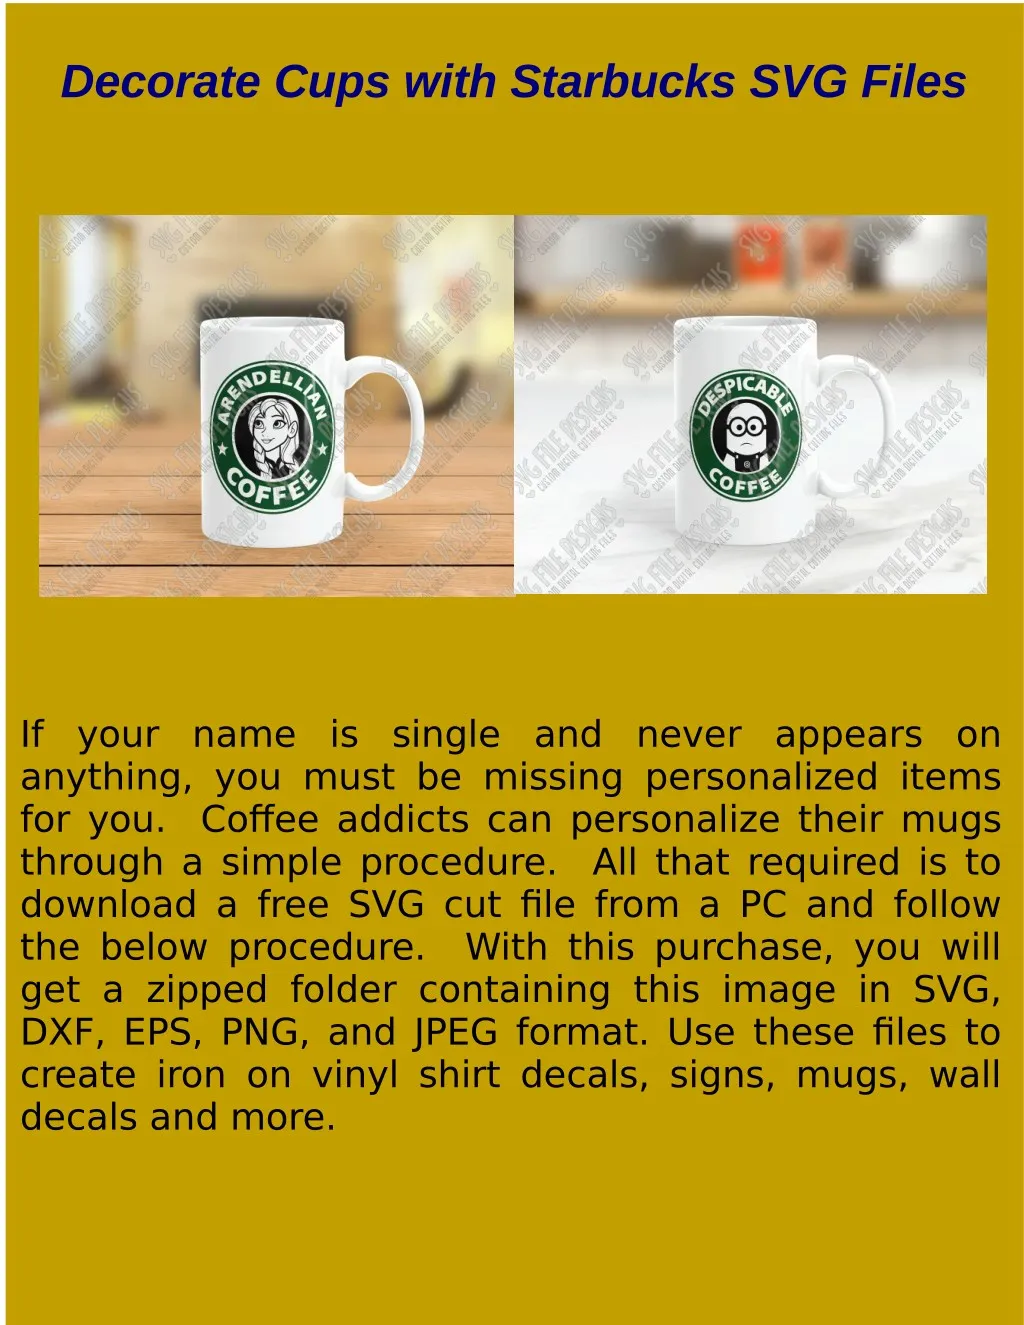 decorate cups with starbucks svg files